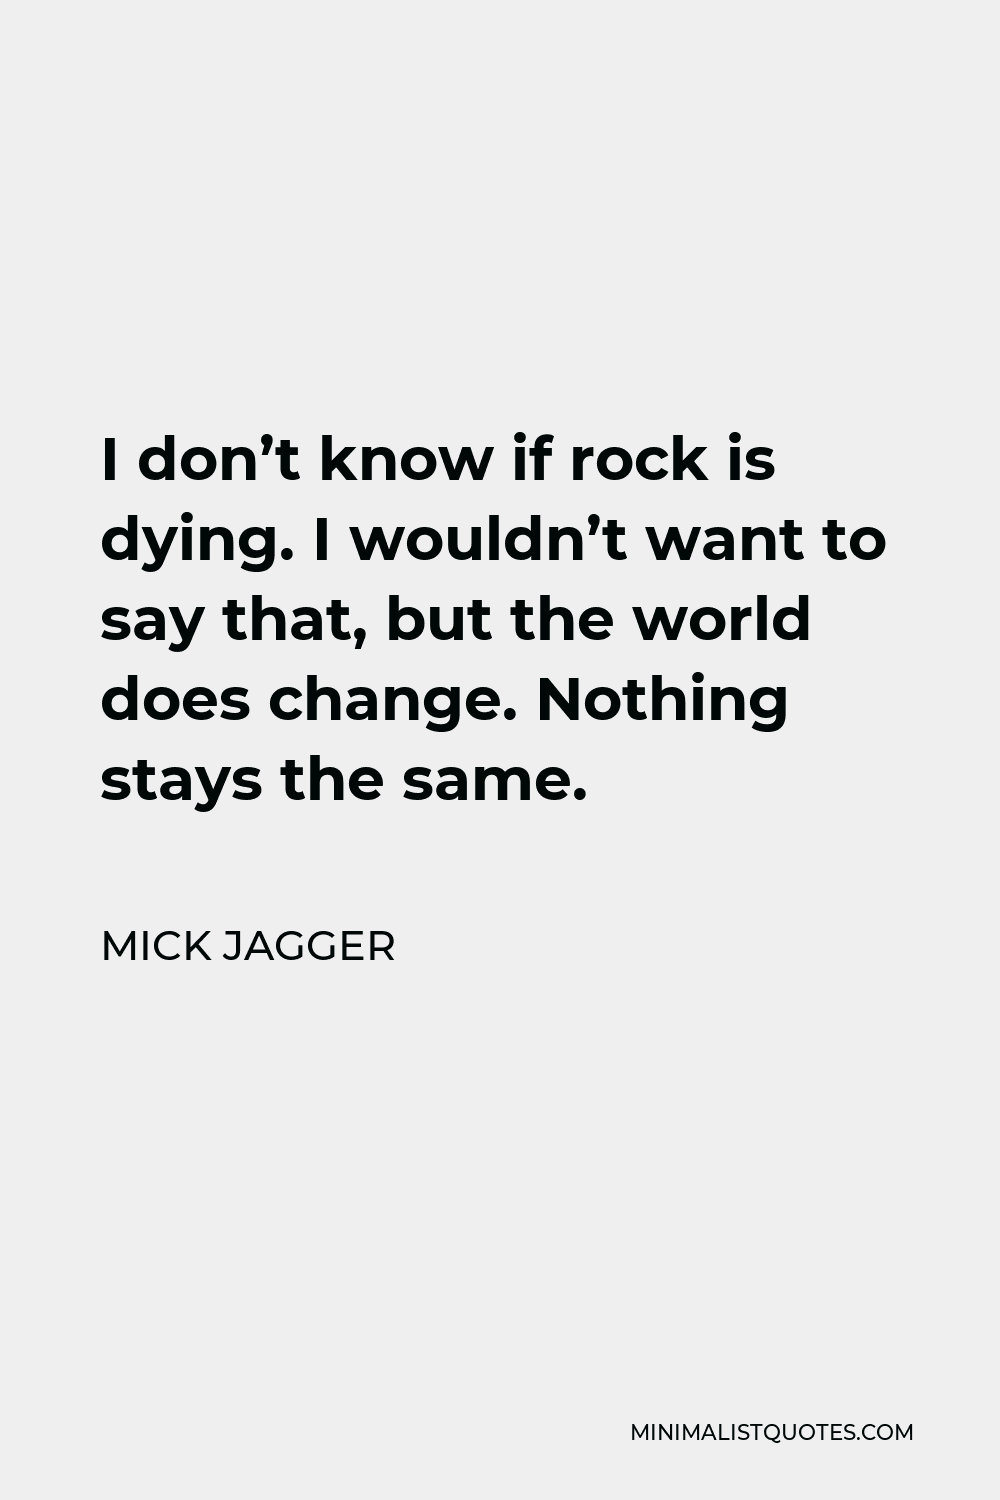 Mick Jagger Quote - I don’t know if rock is dying. I wouldn’t want to say that, but the world does change. Nothing stays the same.